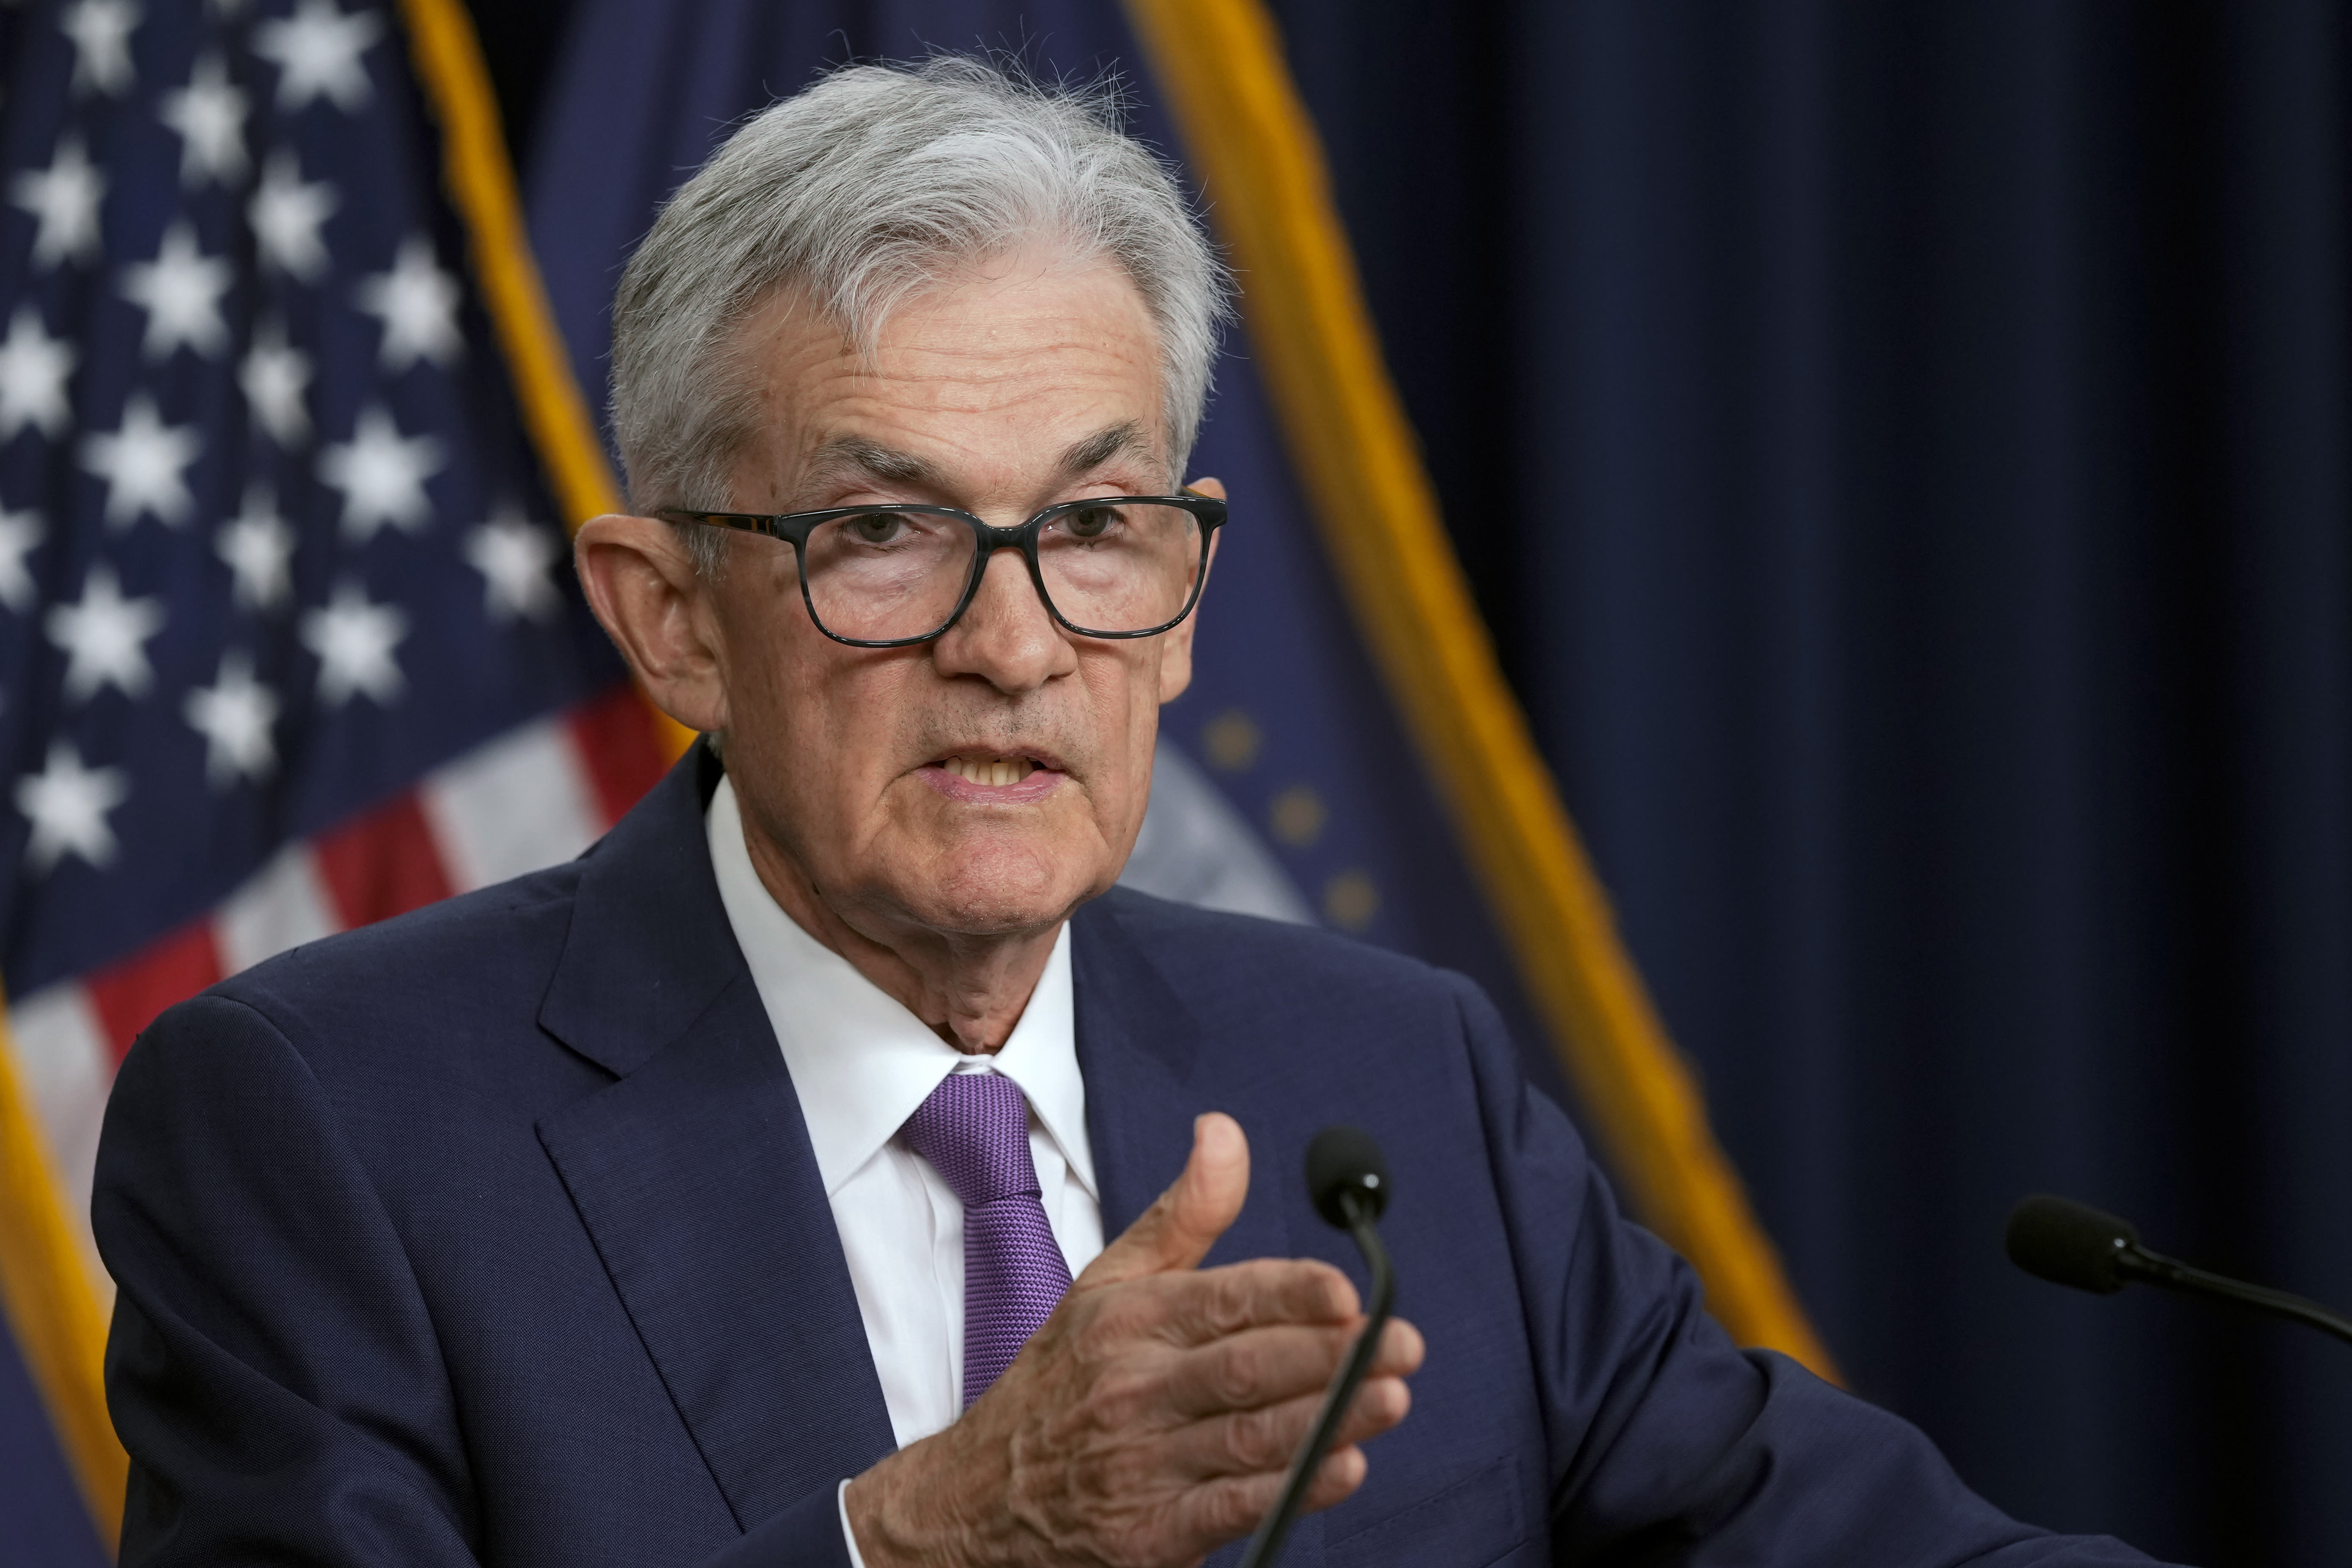 Big banks complete climate analysis for Fed while Powell tries to avoid becoming climate policymaker